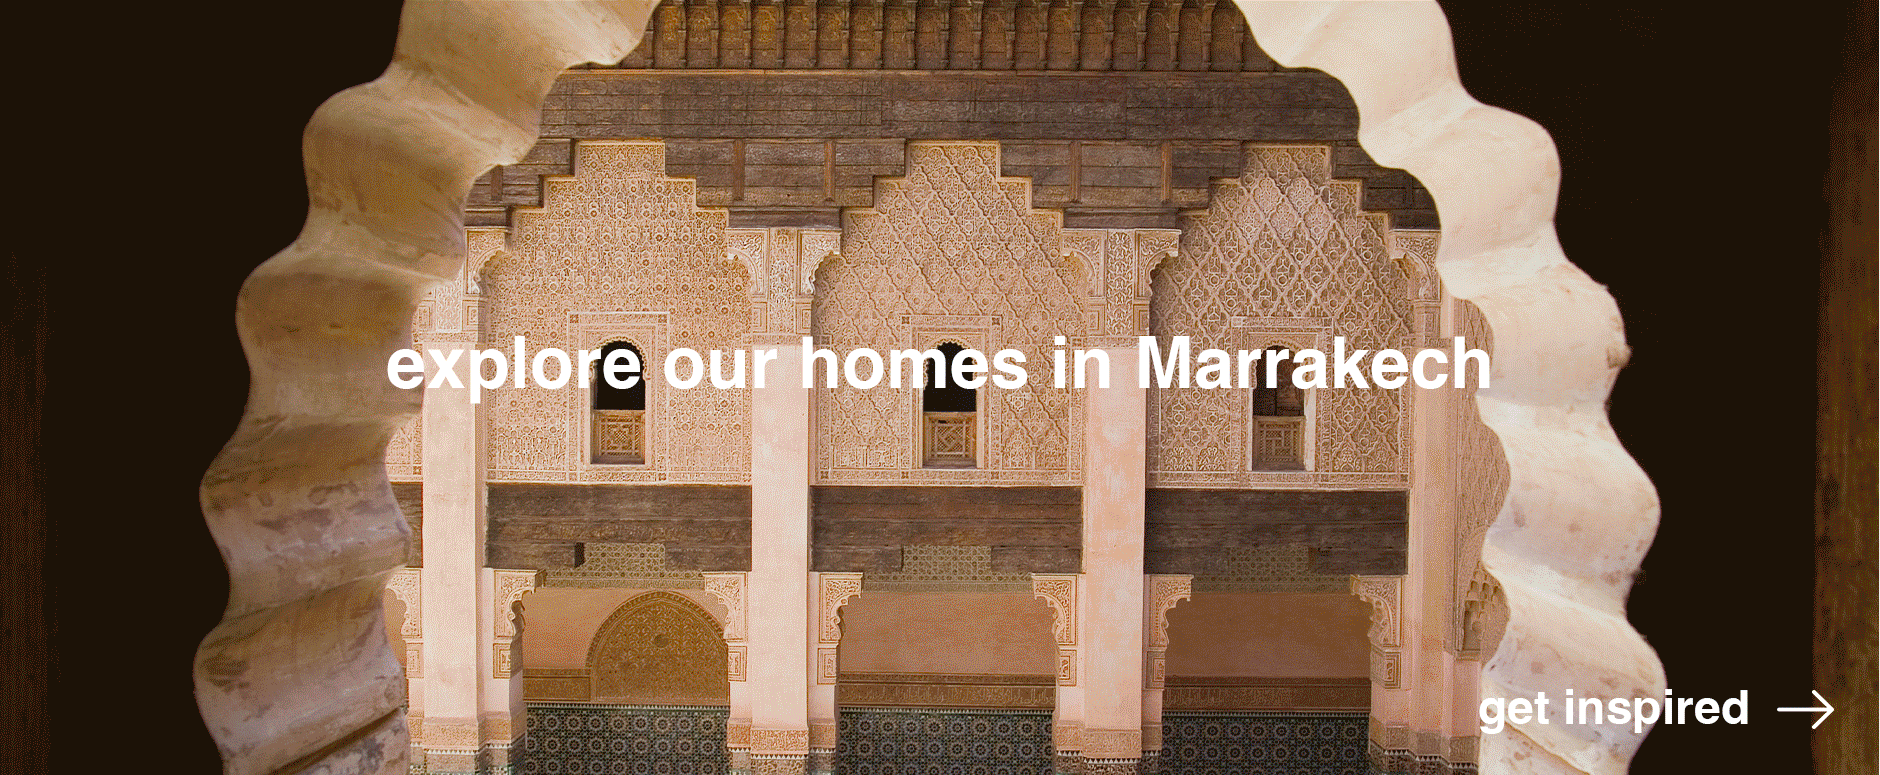 Explore our homes in Marrakech